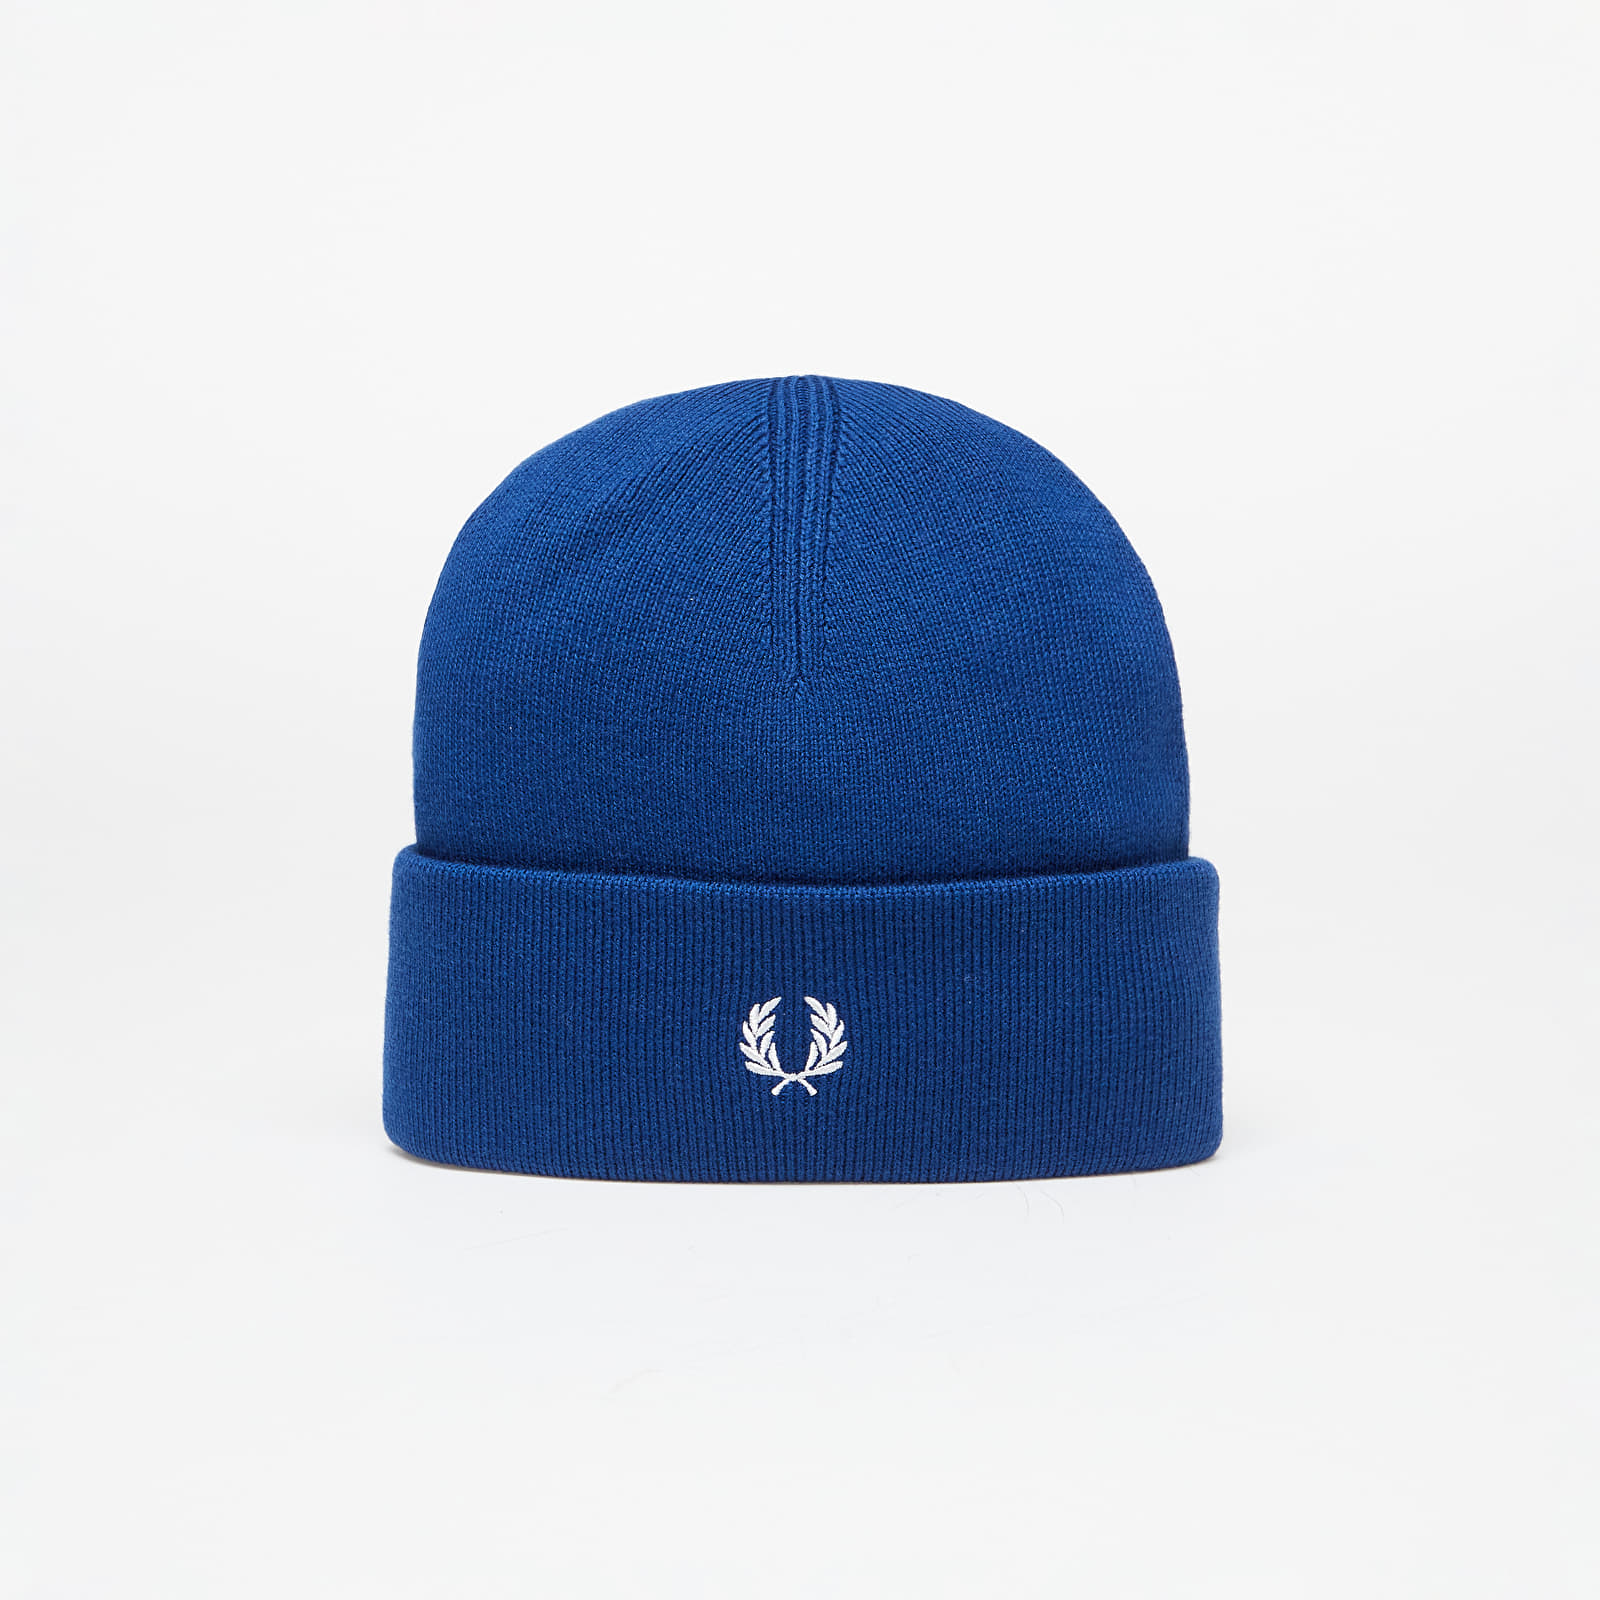 FRED PERRY - classic beanie french navy